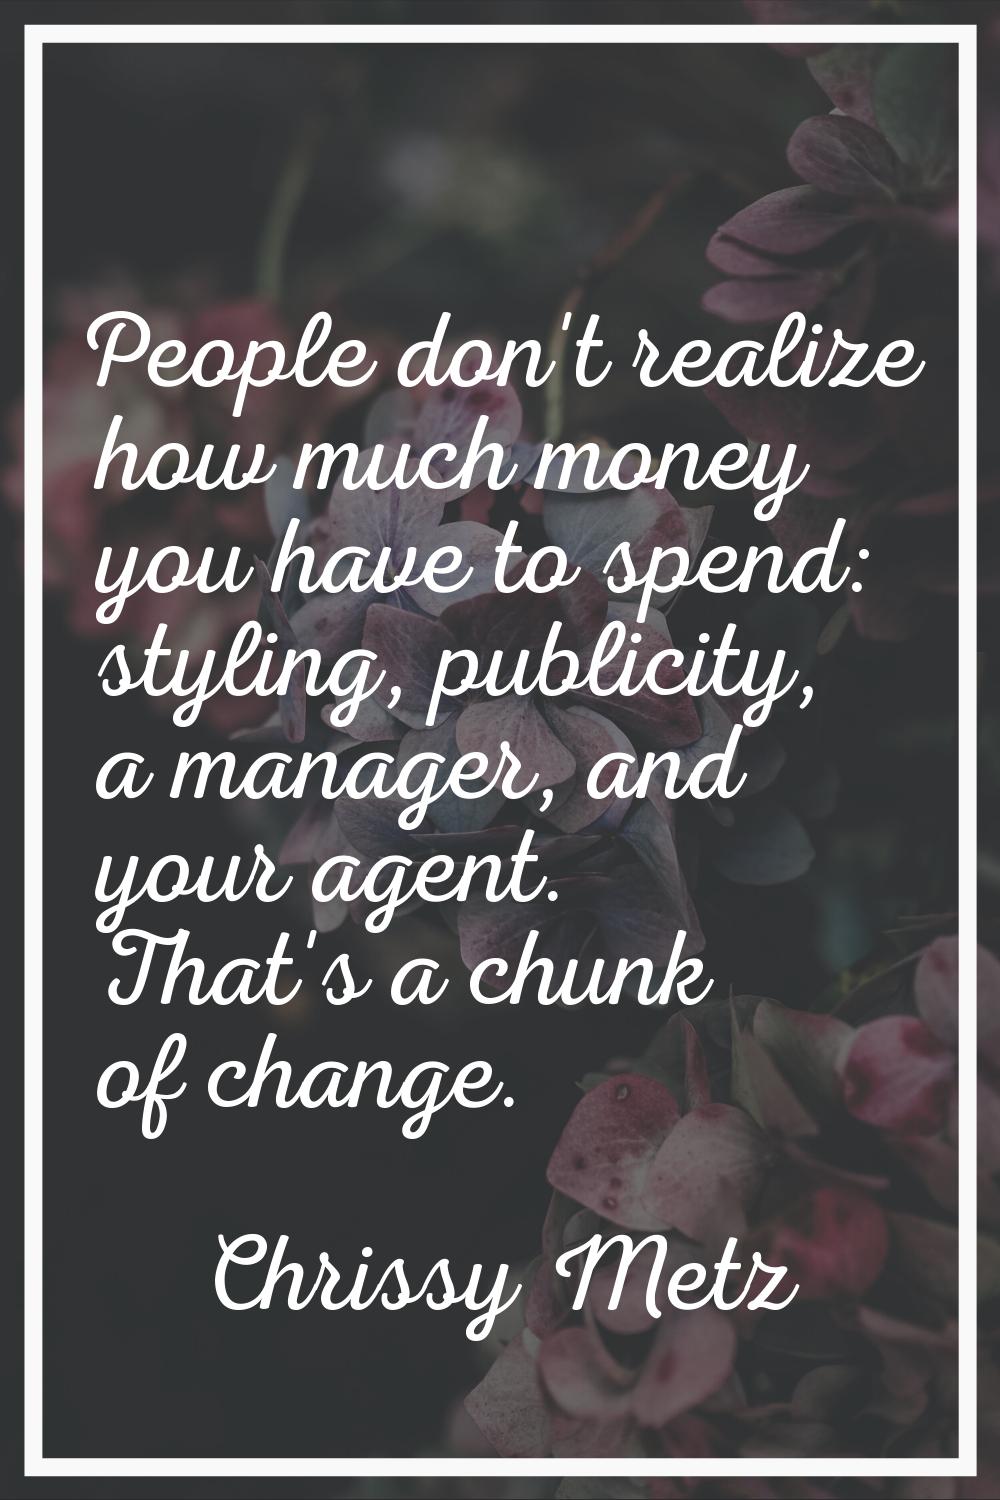 People don't realize how much money you have to spend: styling, publicity, a manager, and your agen